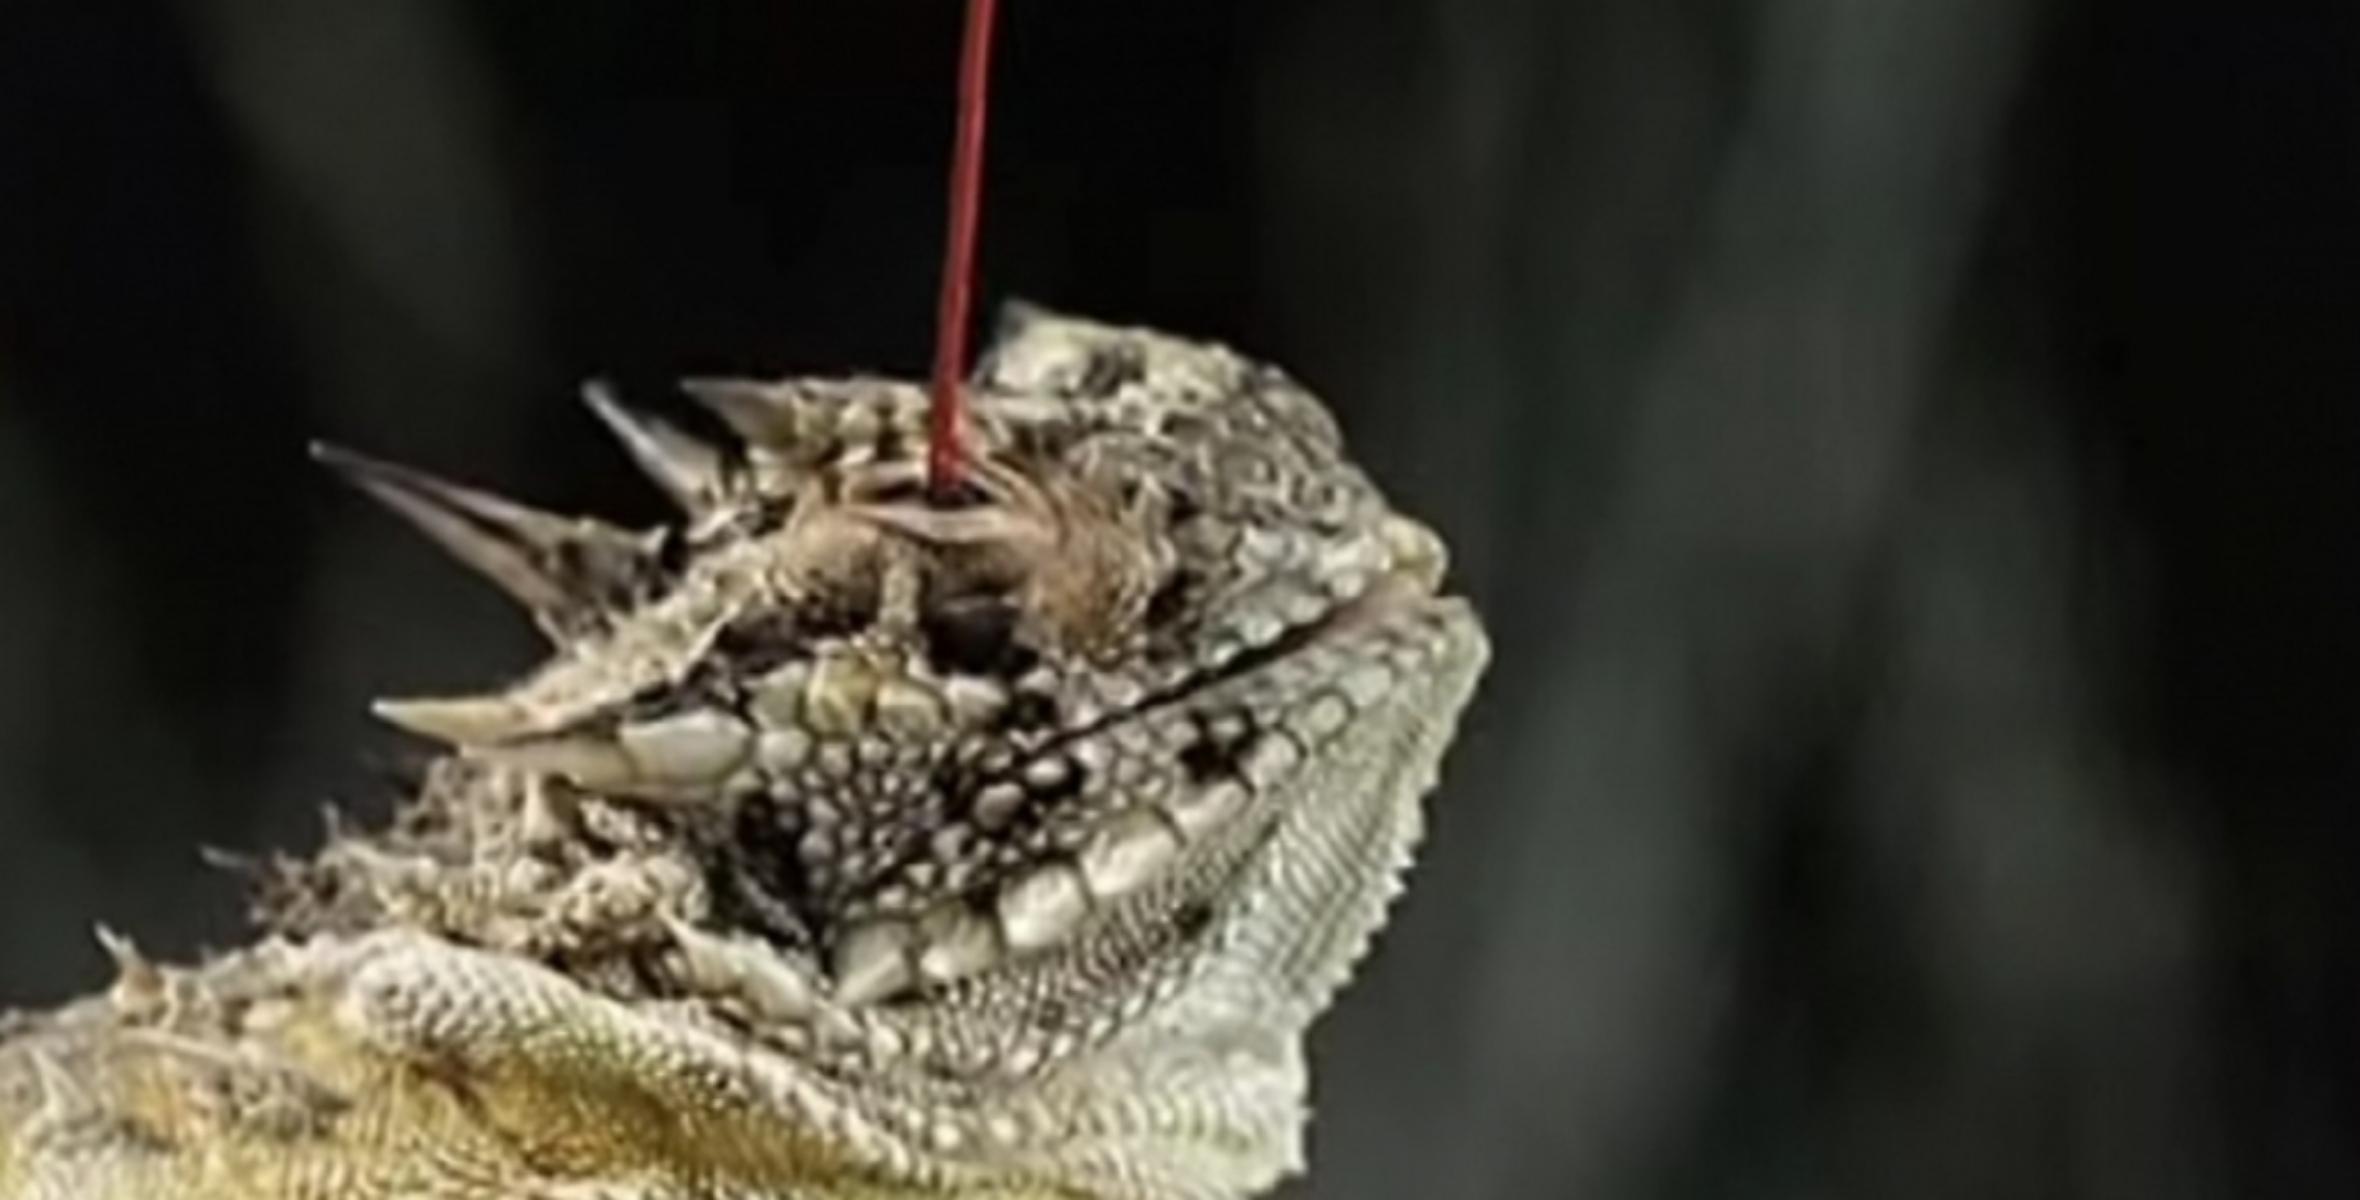 The super power of the horned lizard